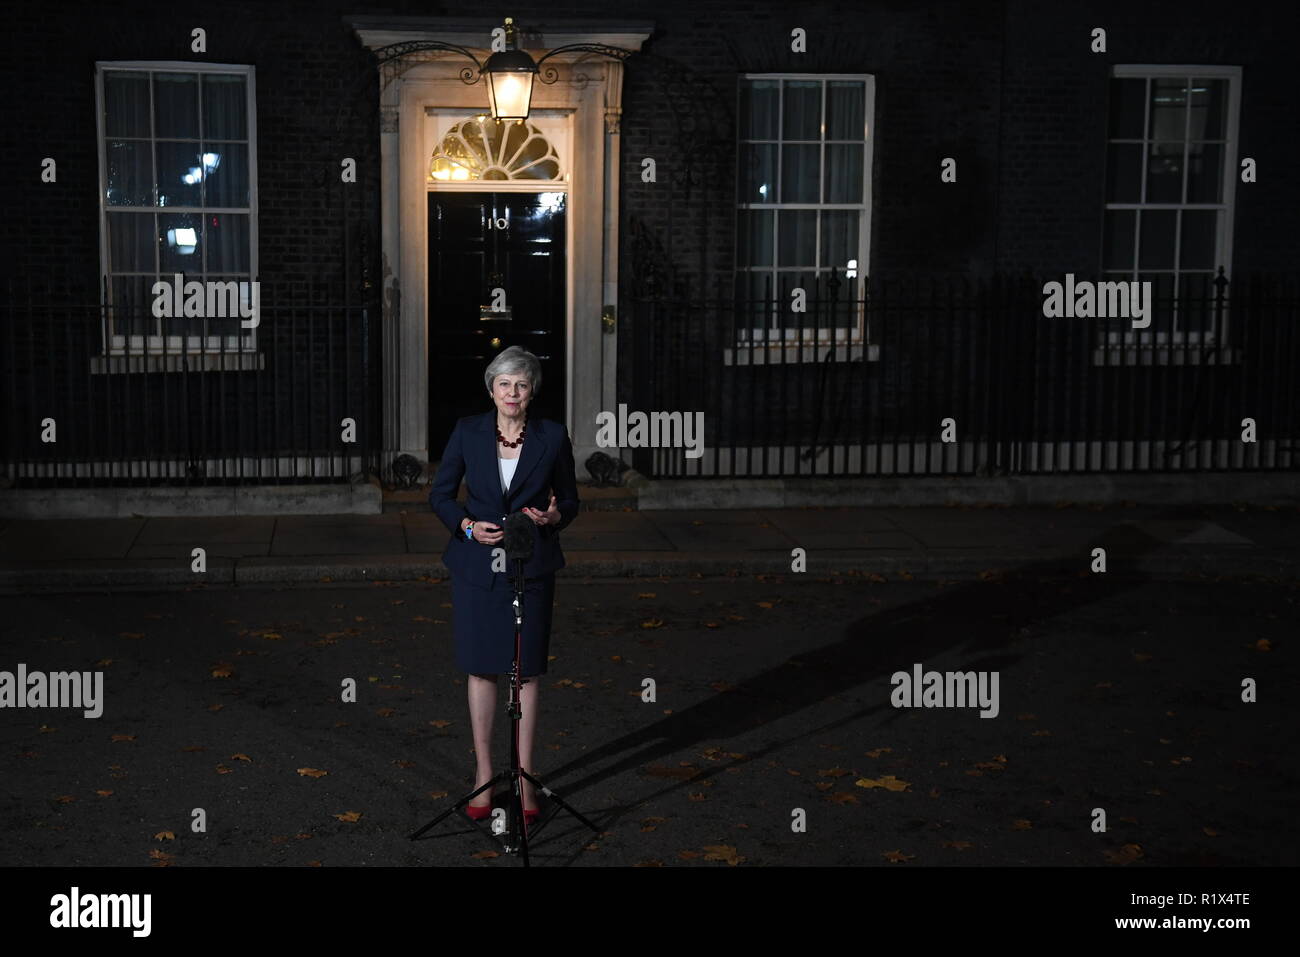 Prime Minister Theresa May makes a statement outside 10 Downing Street, London, confirming that Cabinet has agreed the draft Brexit withdrawal agreement. Stock Photo